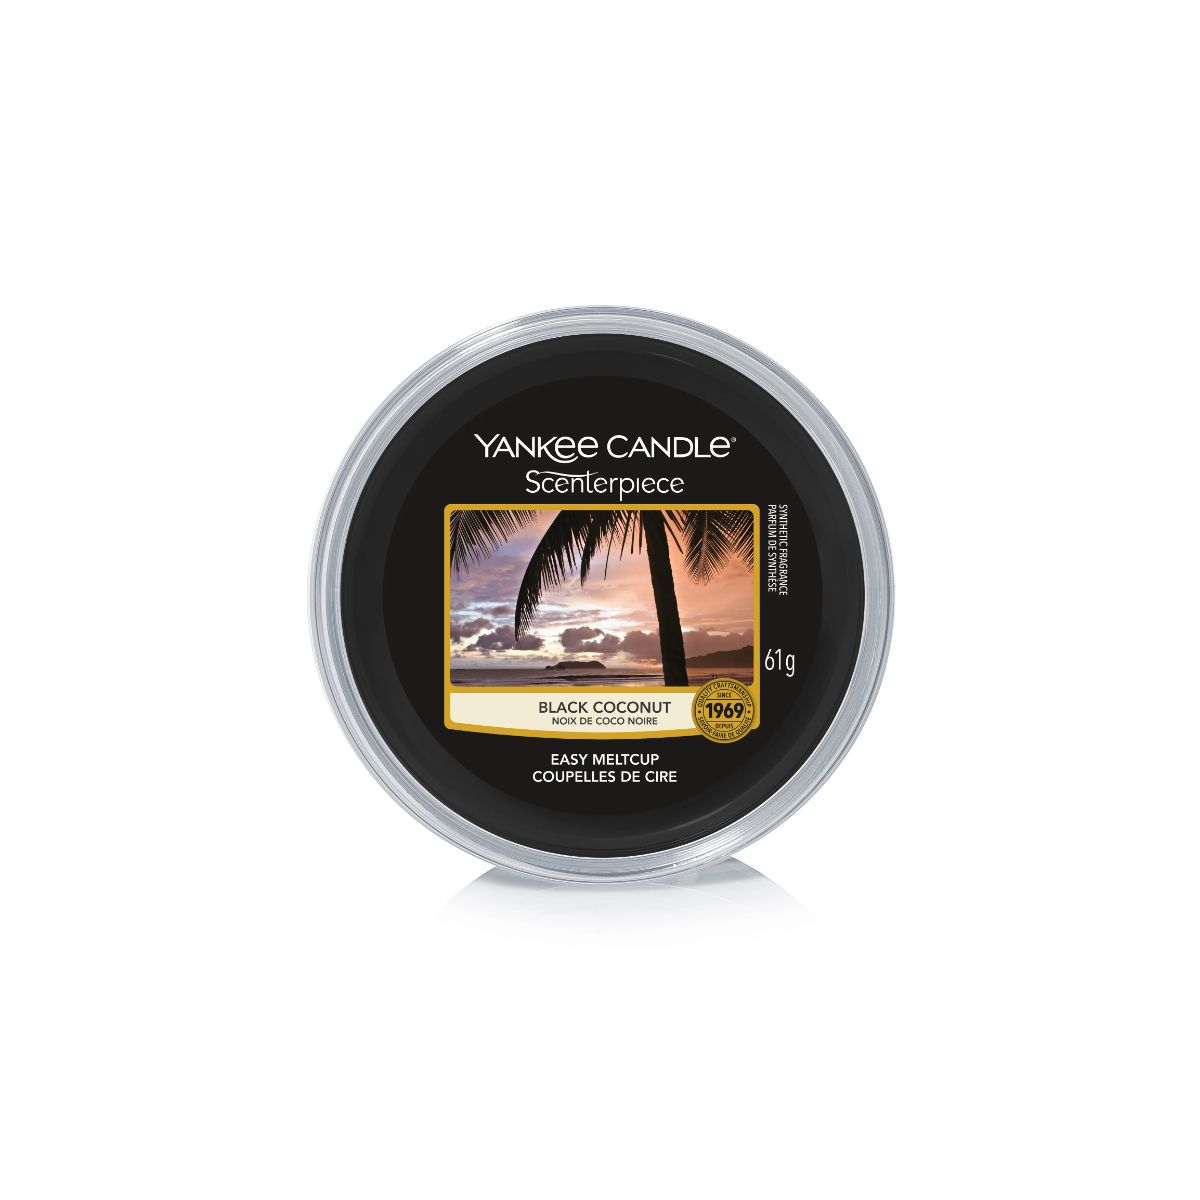 Easy MeltCup Scenterpiece Black Coconut Yankee Candle